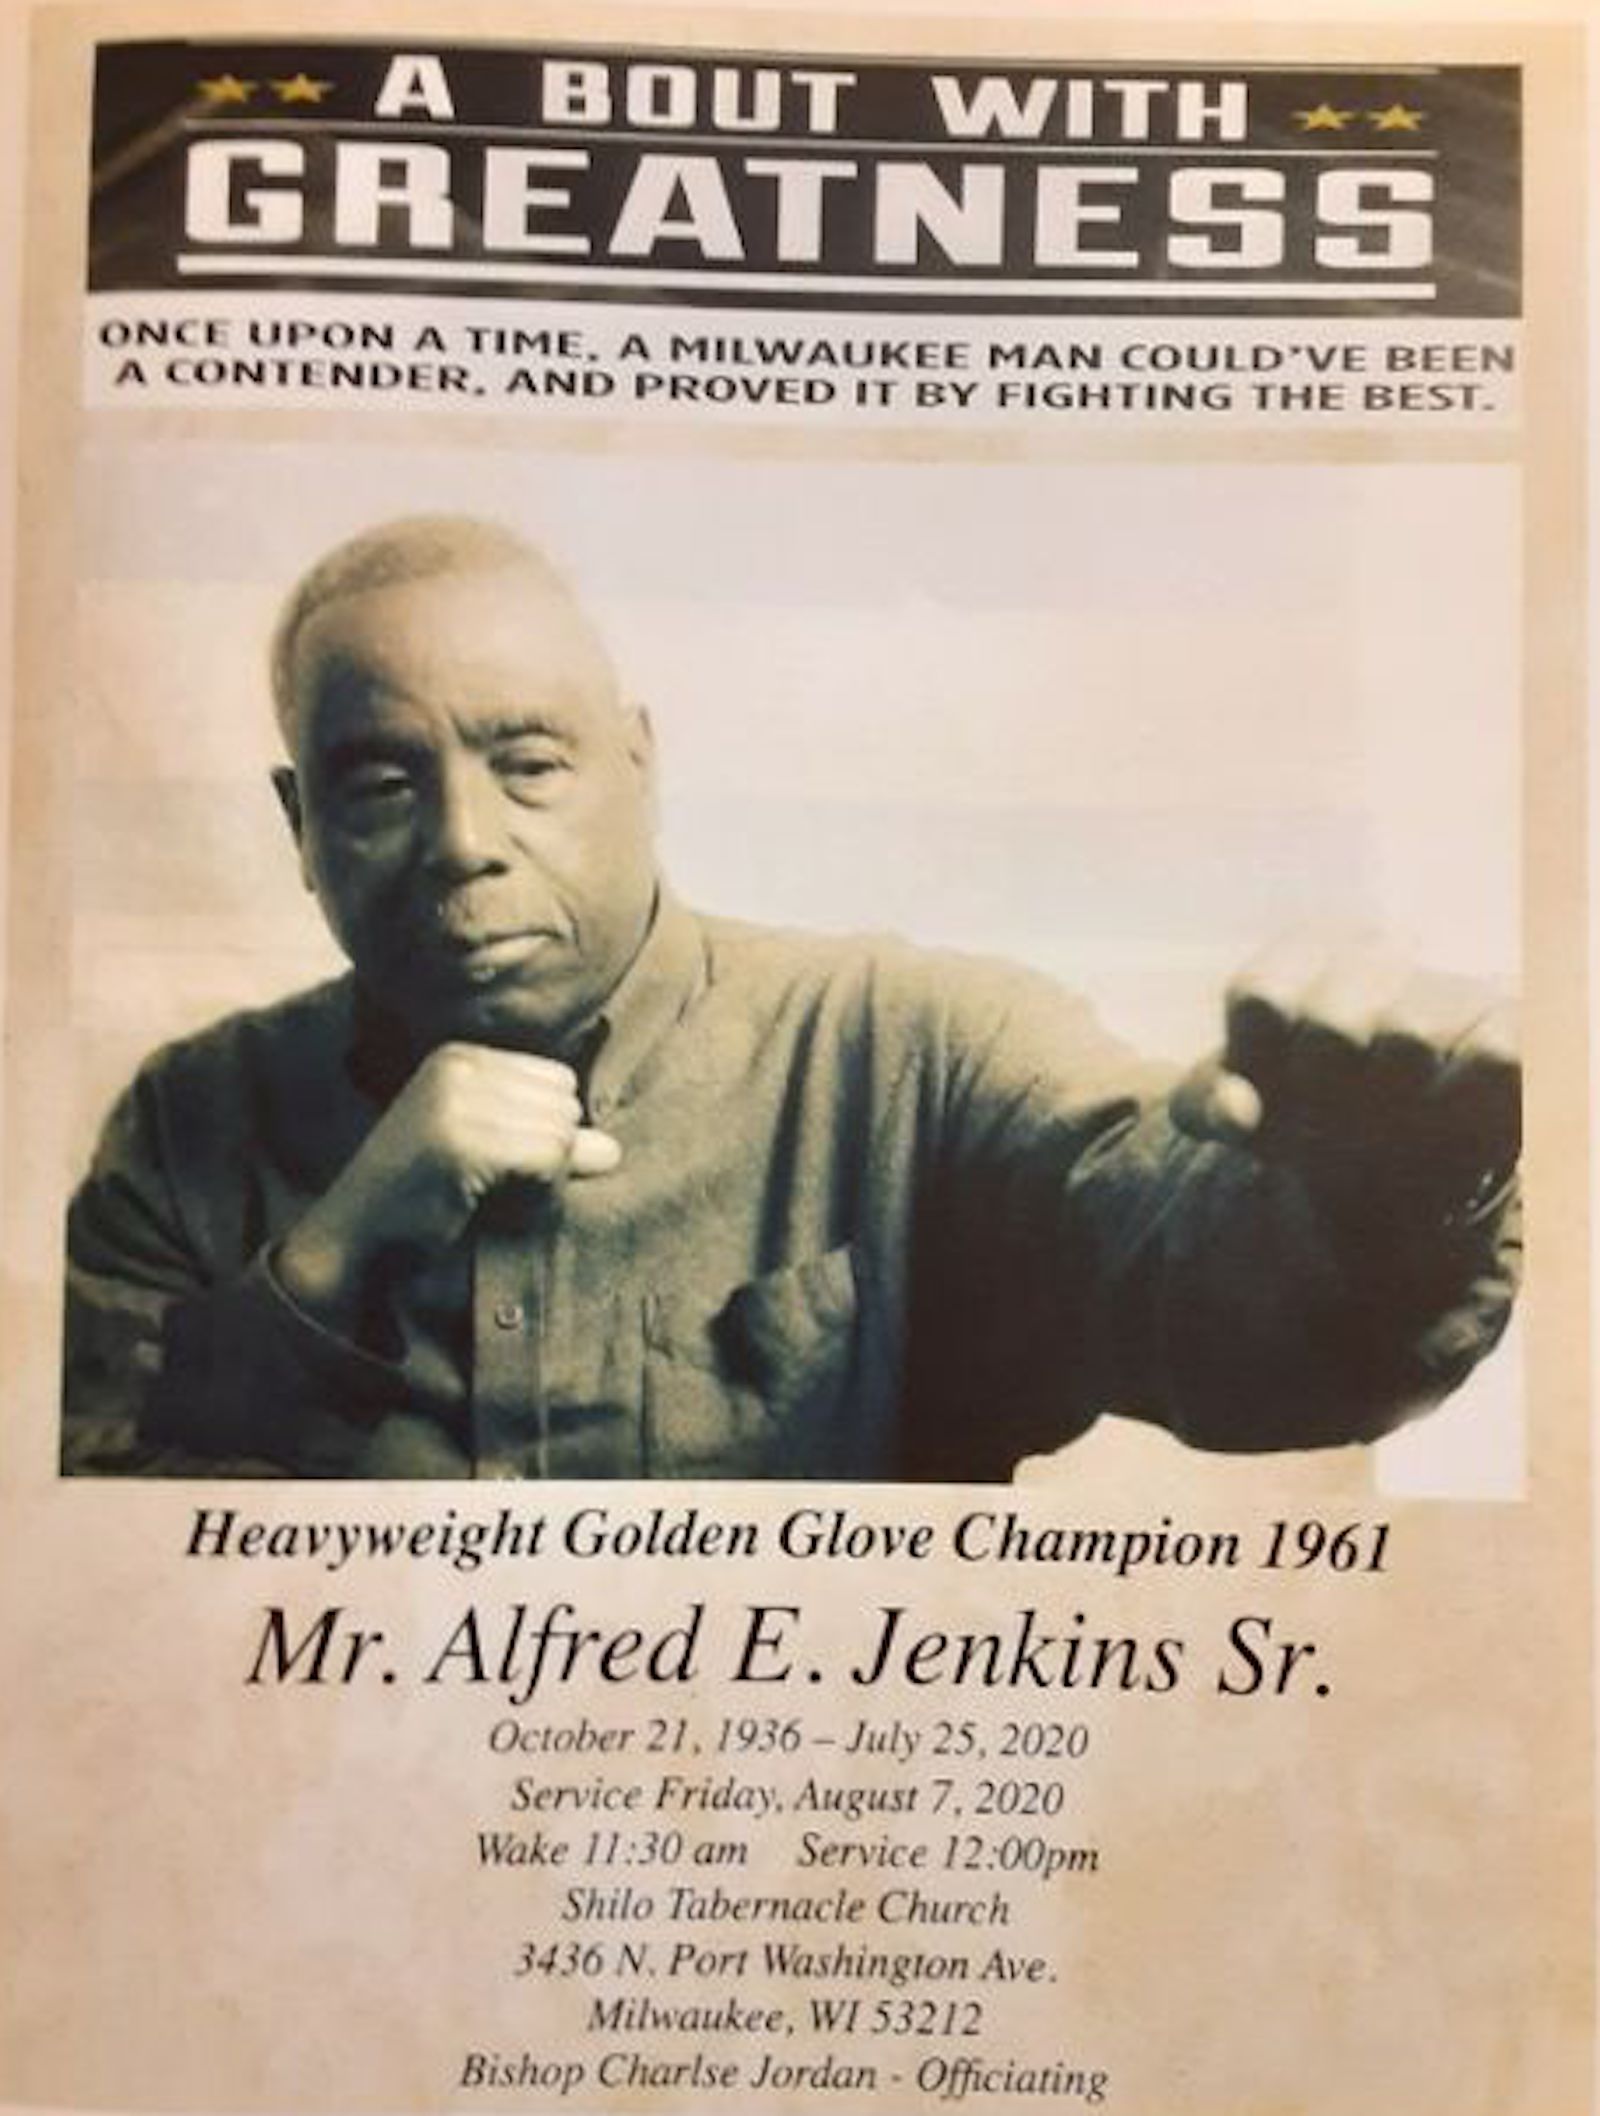 Alfred E. Jenkins Sr. lost at the 1960 Golden Gloves competition to a young fighter named Cassius Clay, the future heavyweight boxing champion who later changed his name to Muhammad Ali. But Mr. Jenkins won the national Golden Gloves heavyweight title in 1961.